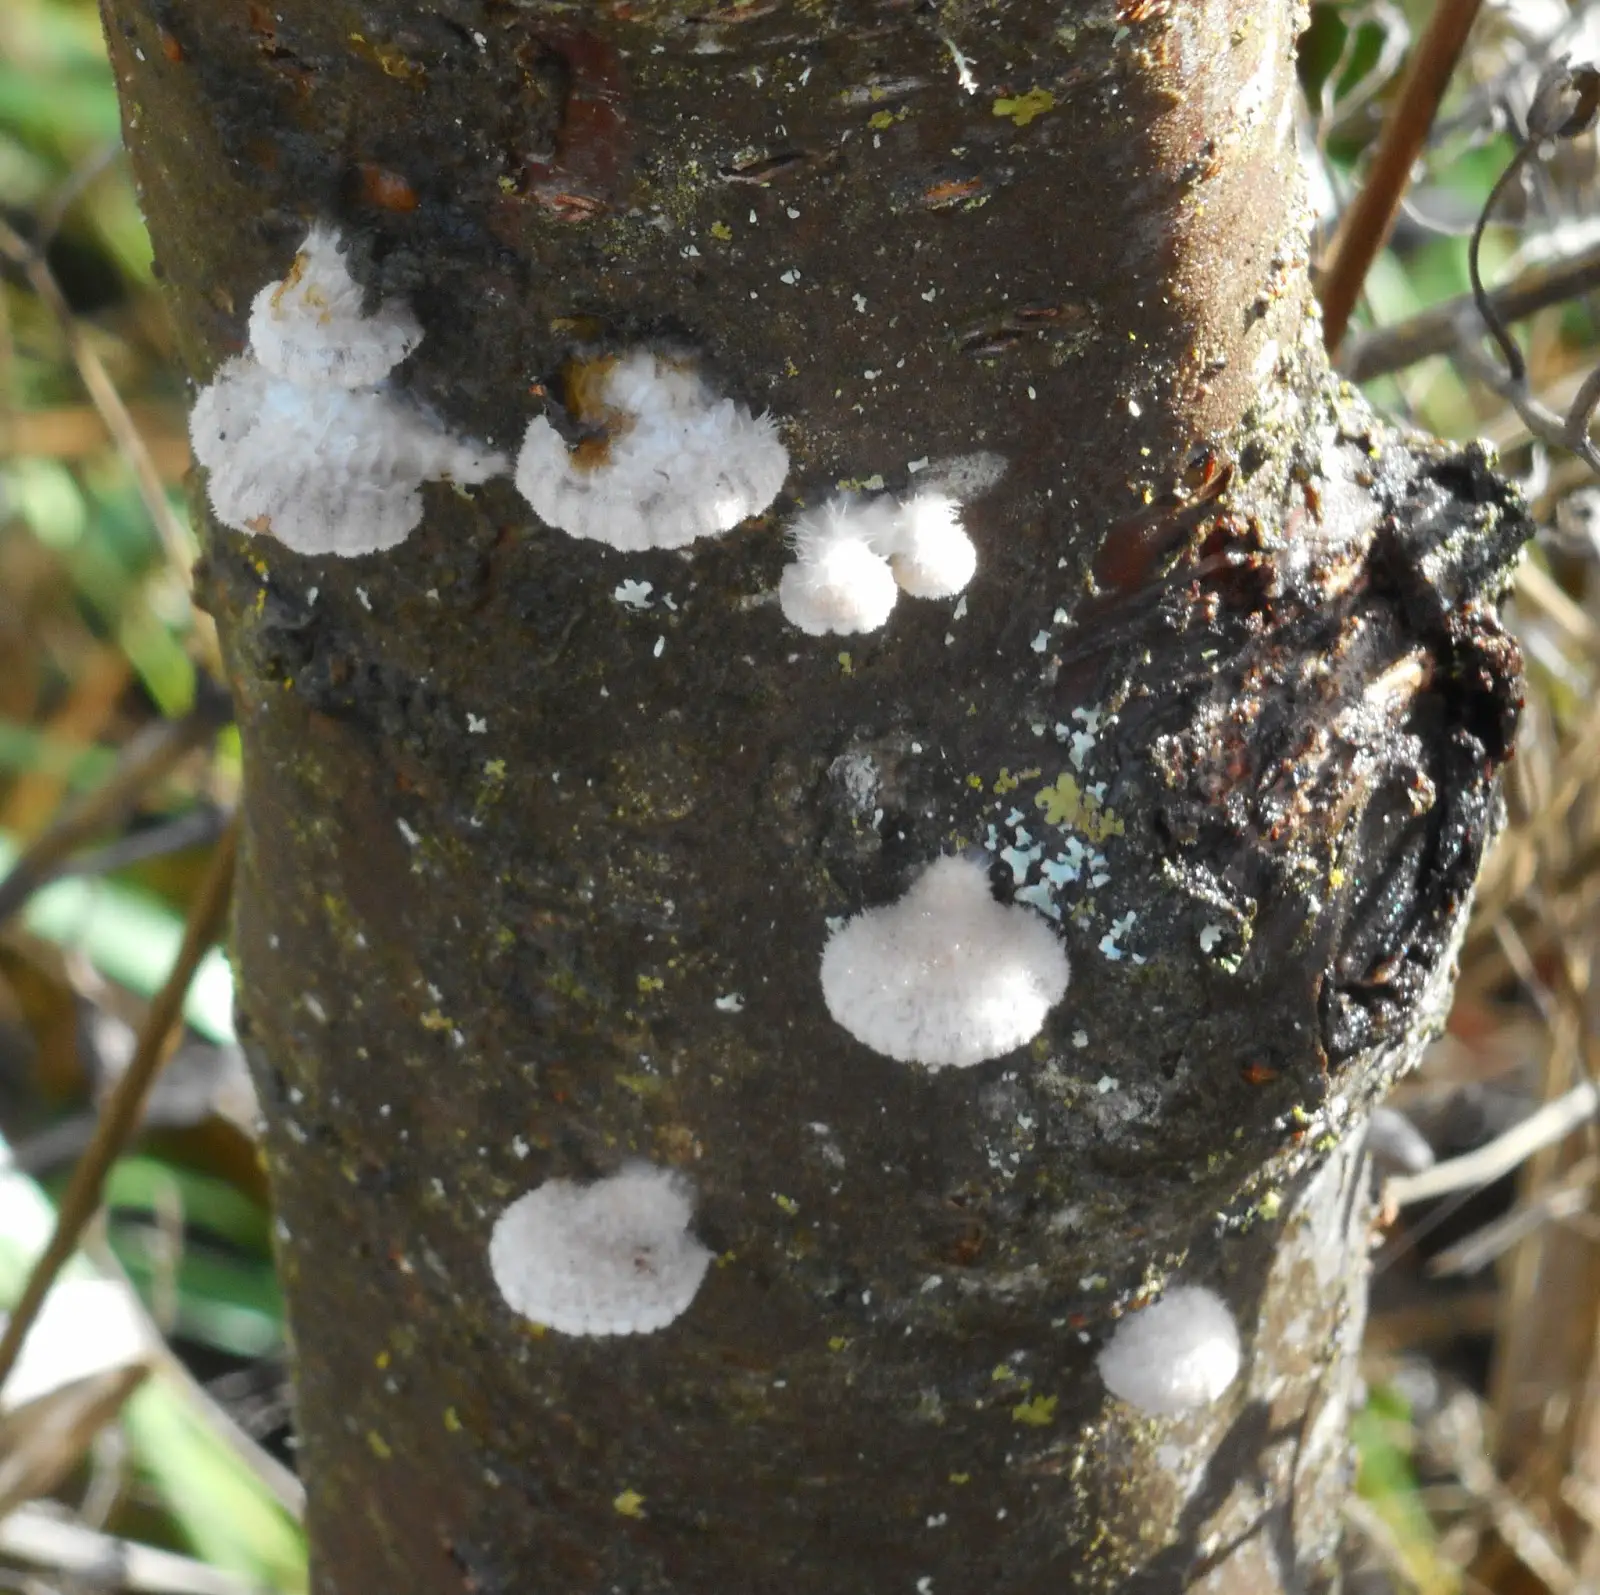 Growing Greener in the Pacific Northwest: Fungus on Cherry Bark. 11.15.15